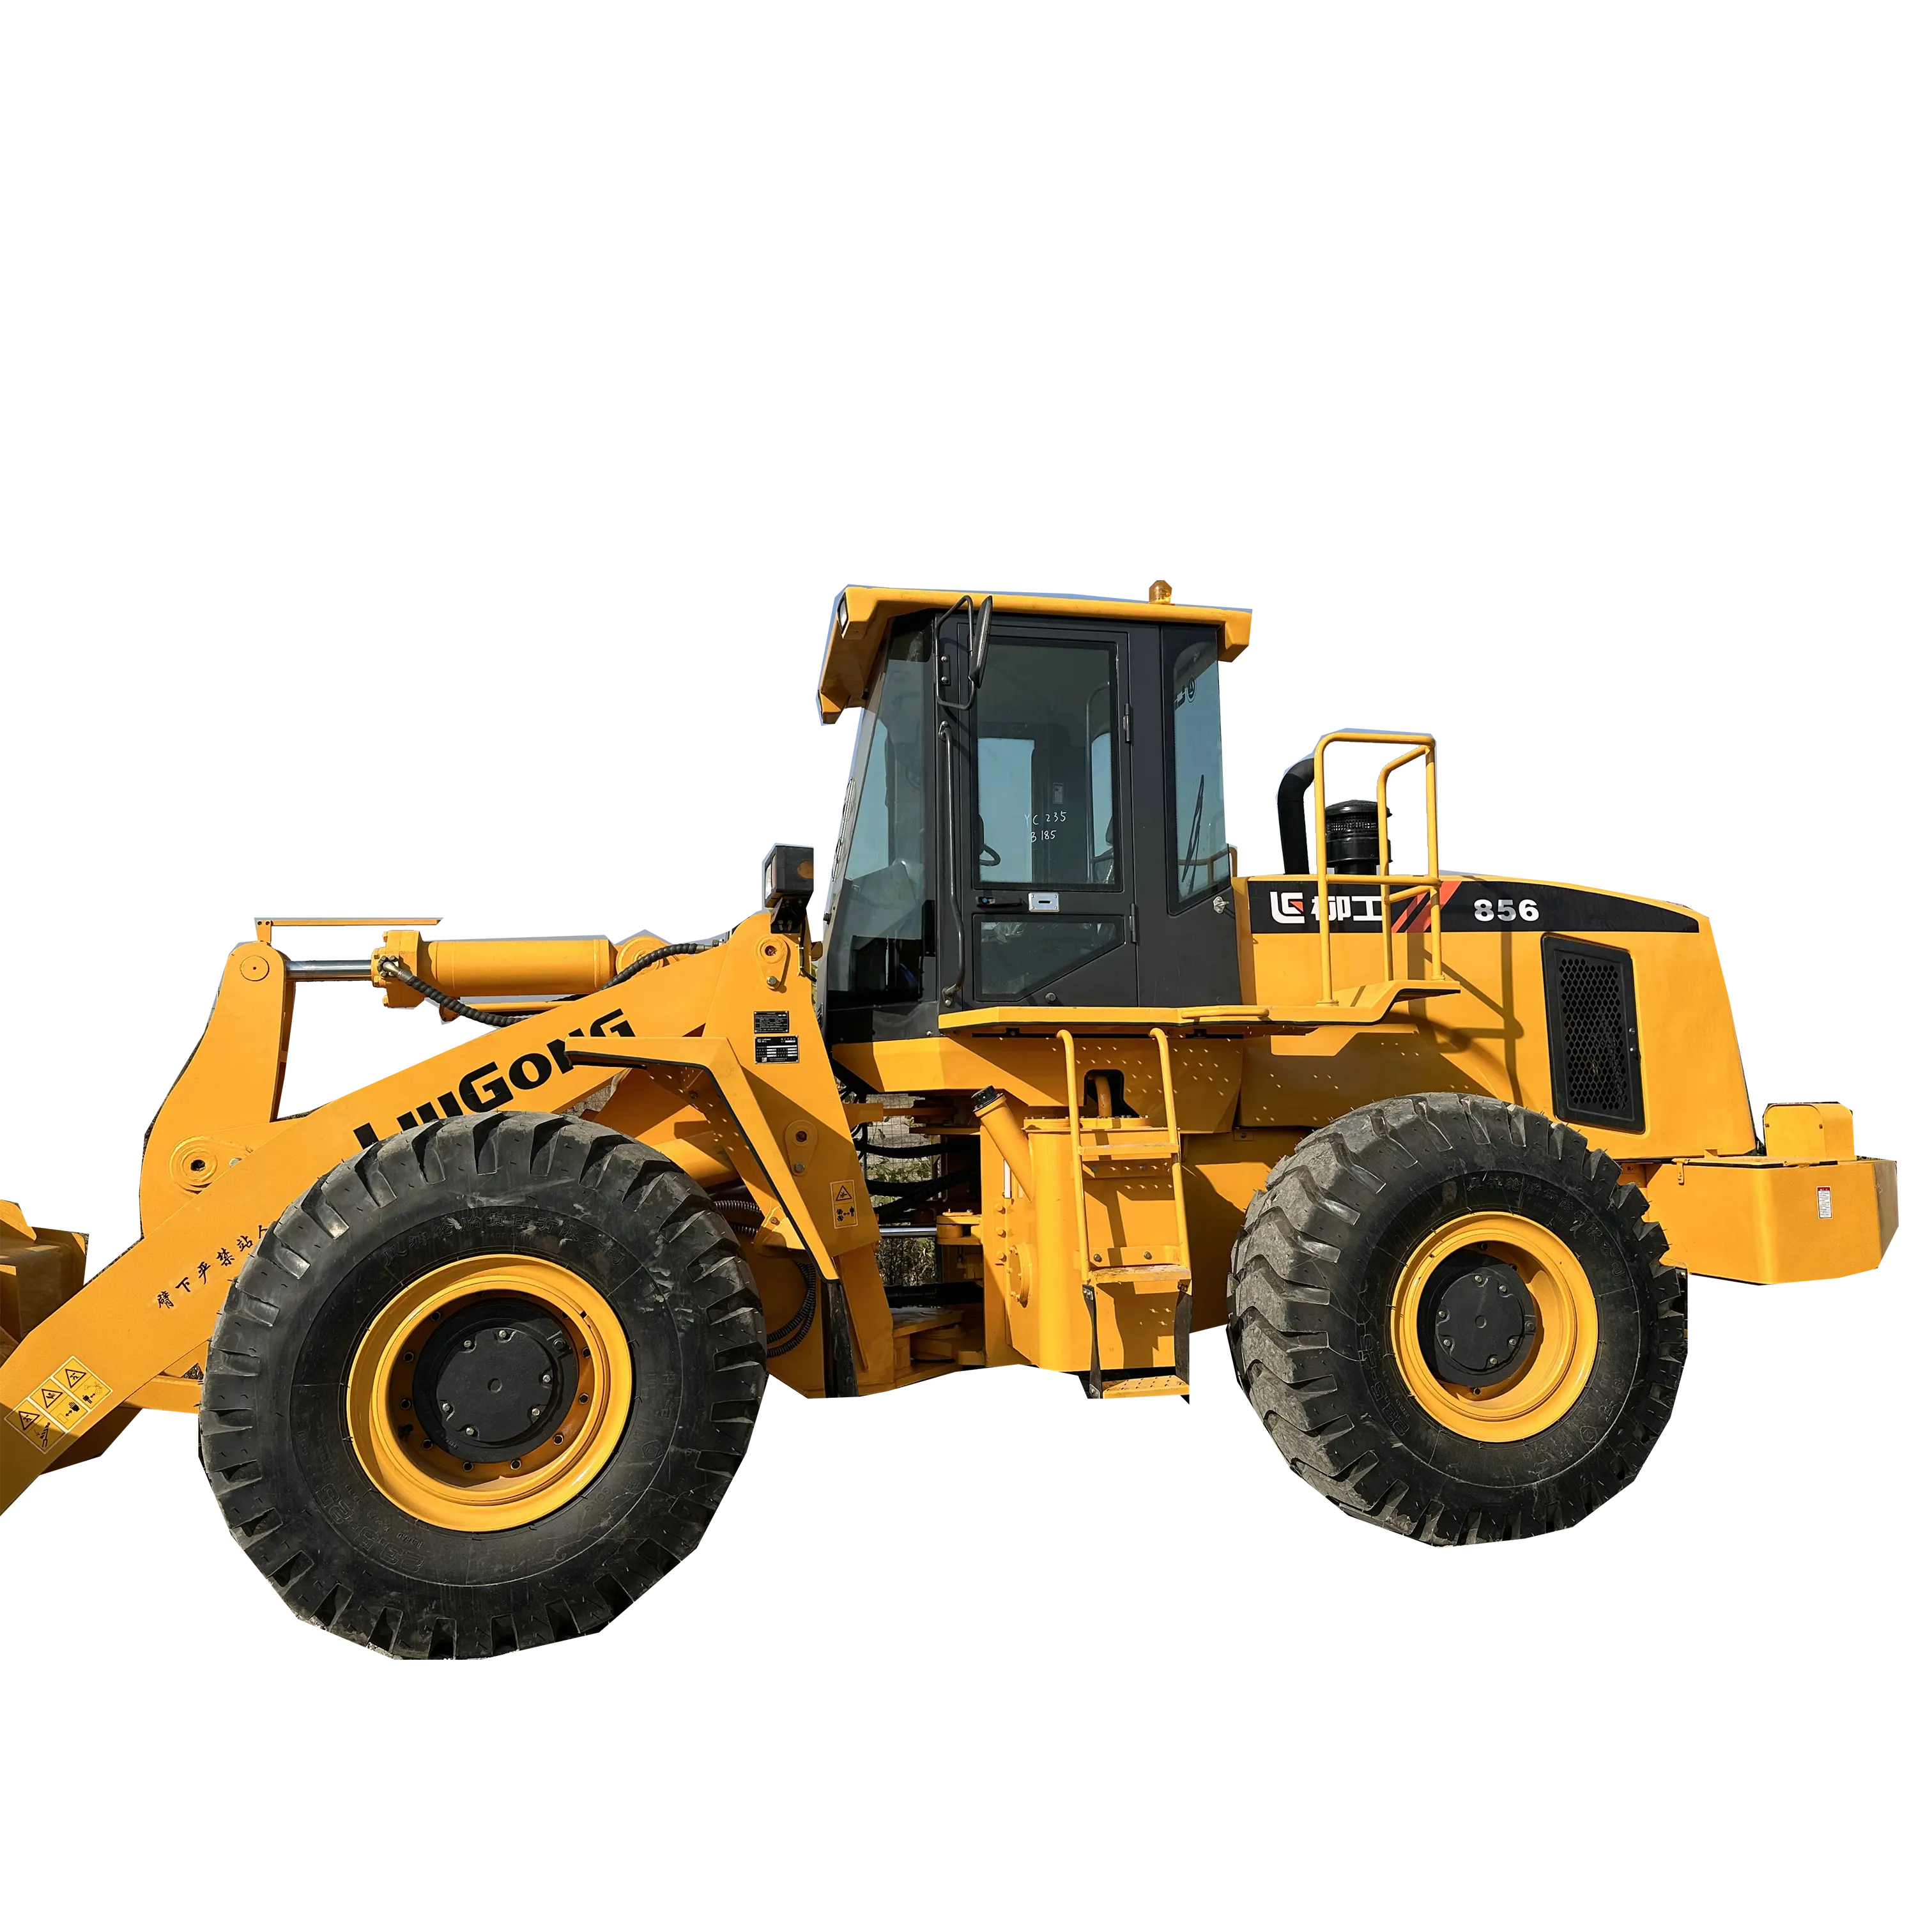 98%New Loaders high efficiency Wheel Loader Liugong856 Powerful Chinese Made Front Loader Road Machine Liugong 856